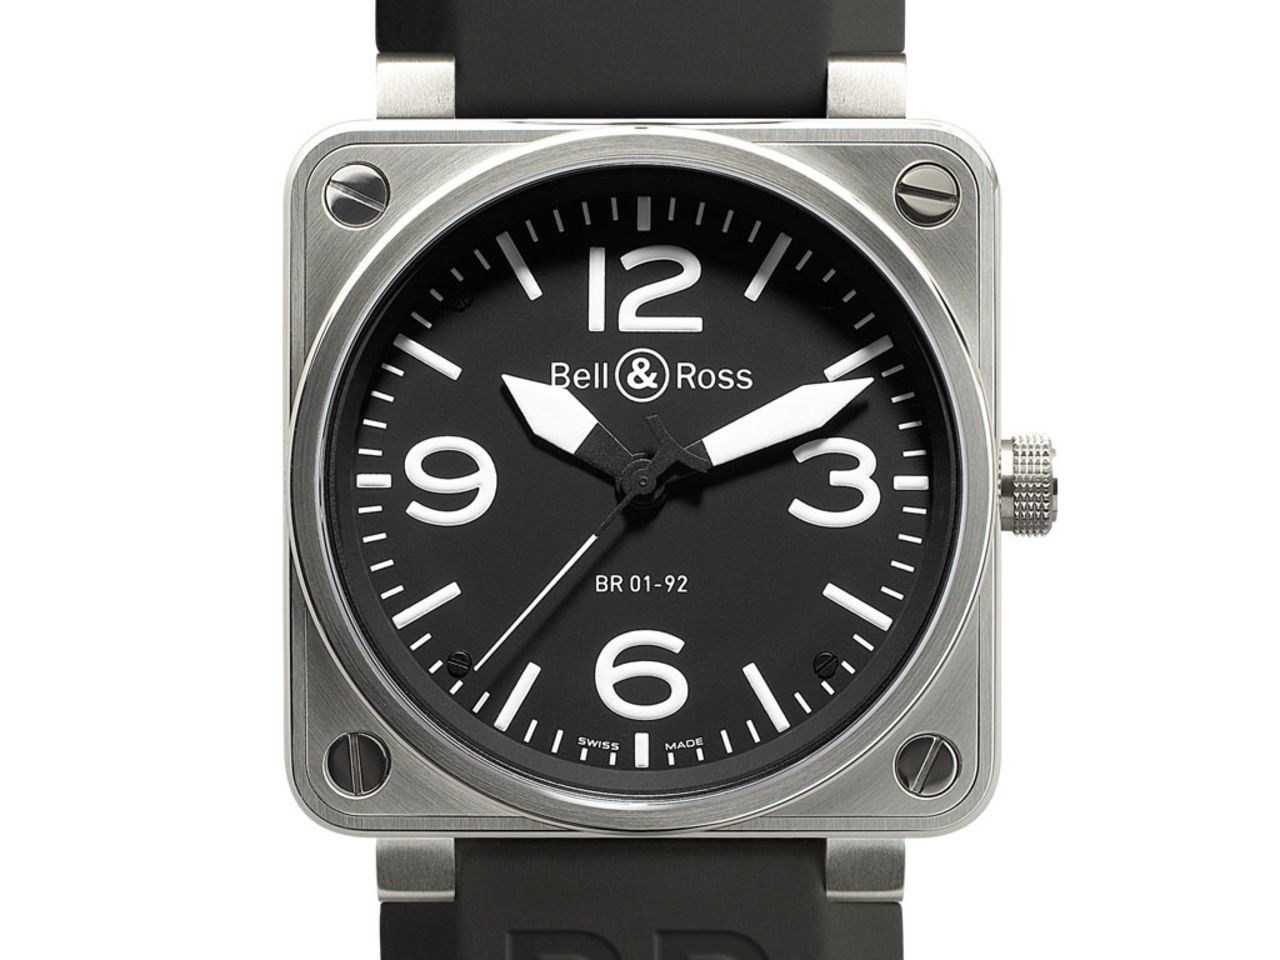 Large, square and an homage to cockpit instrumentation, with the BR01, young company Bell & Ross struck gold in 2005 with a counter-intuitive watch that became widely copied.